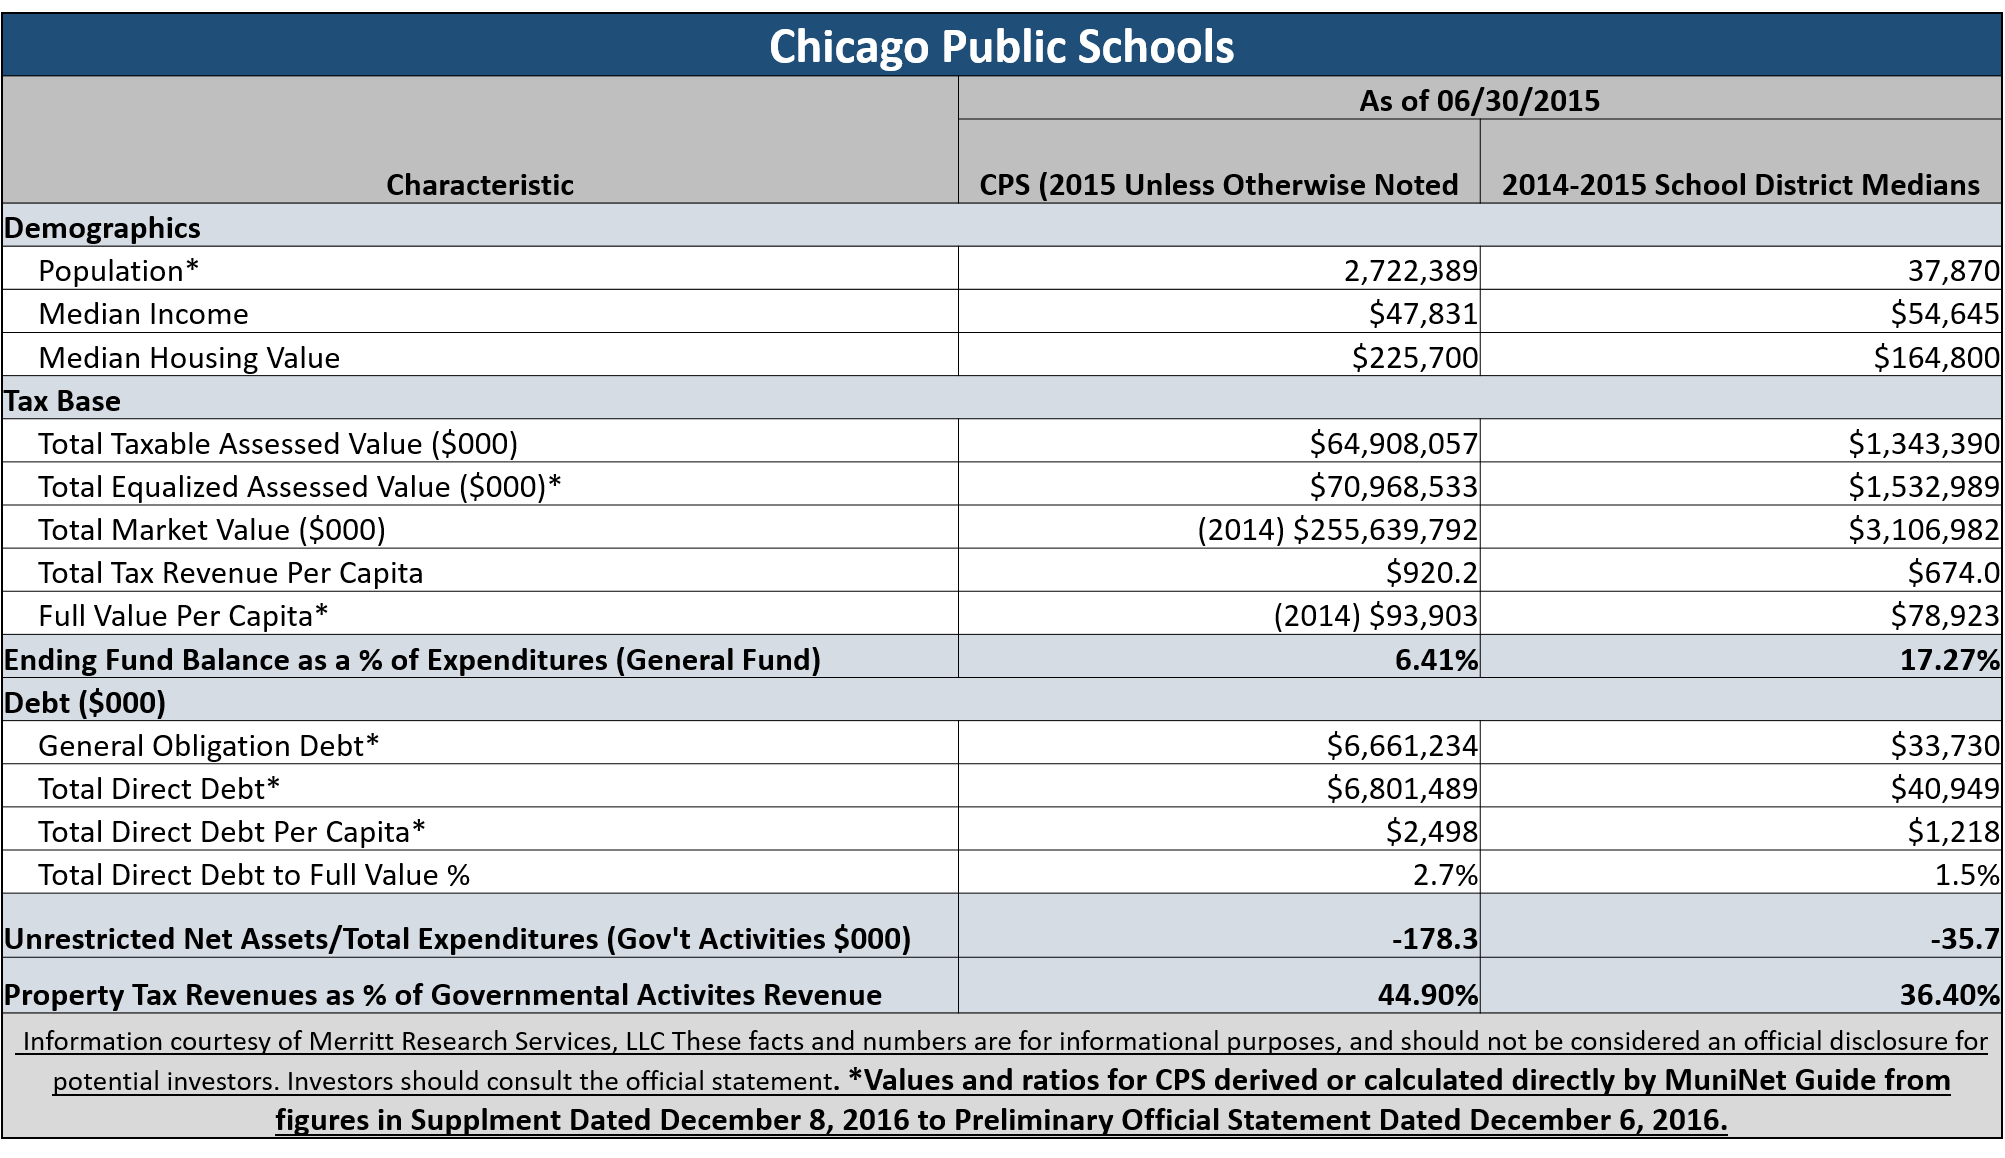 Chicago Board of Education